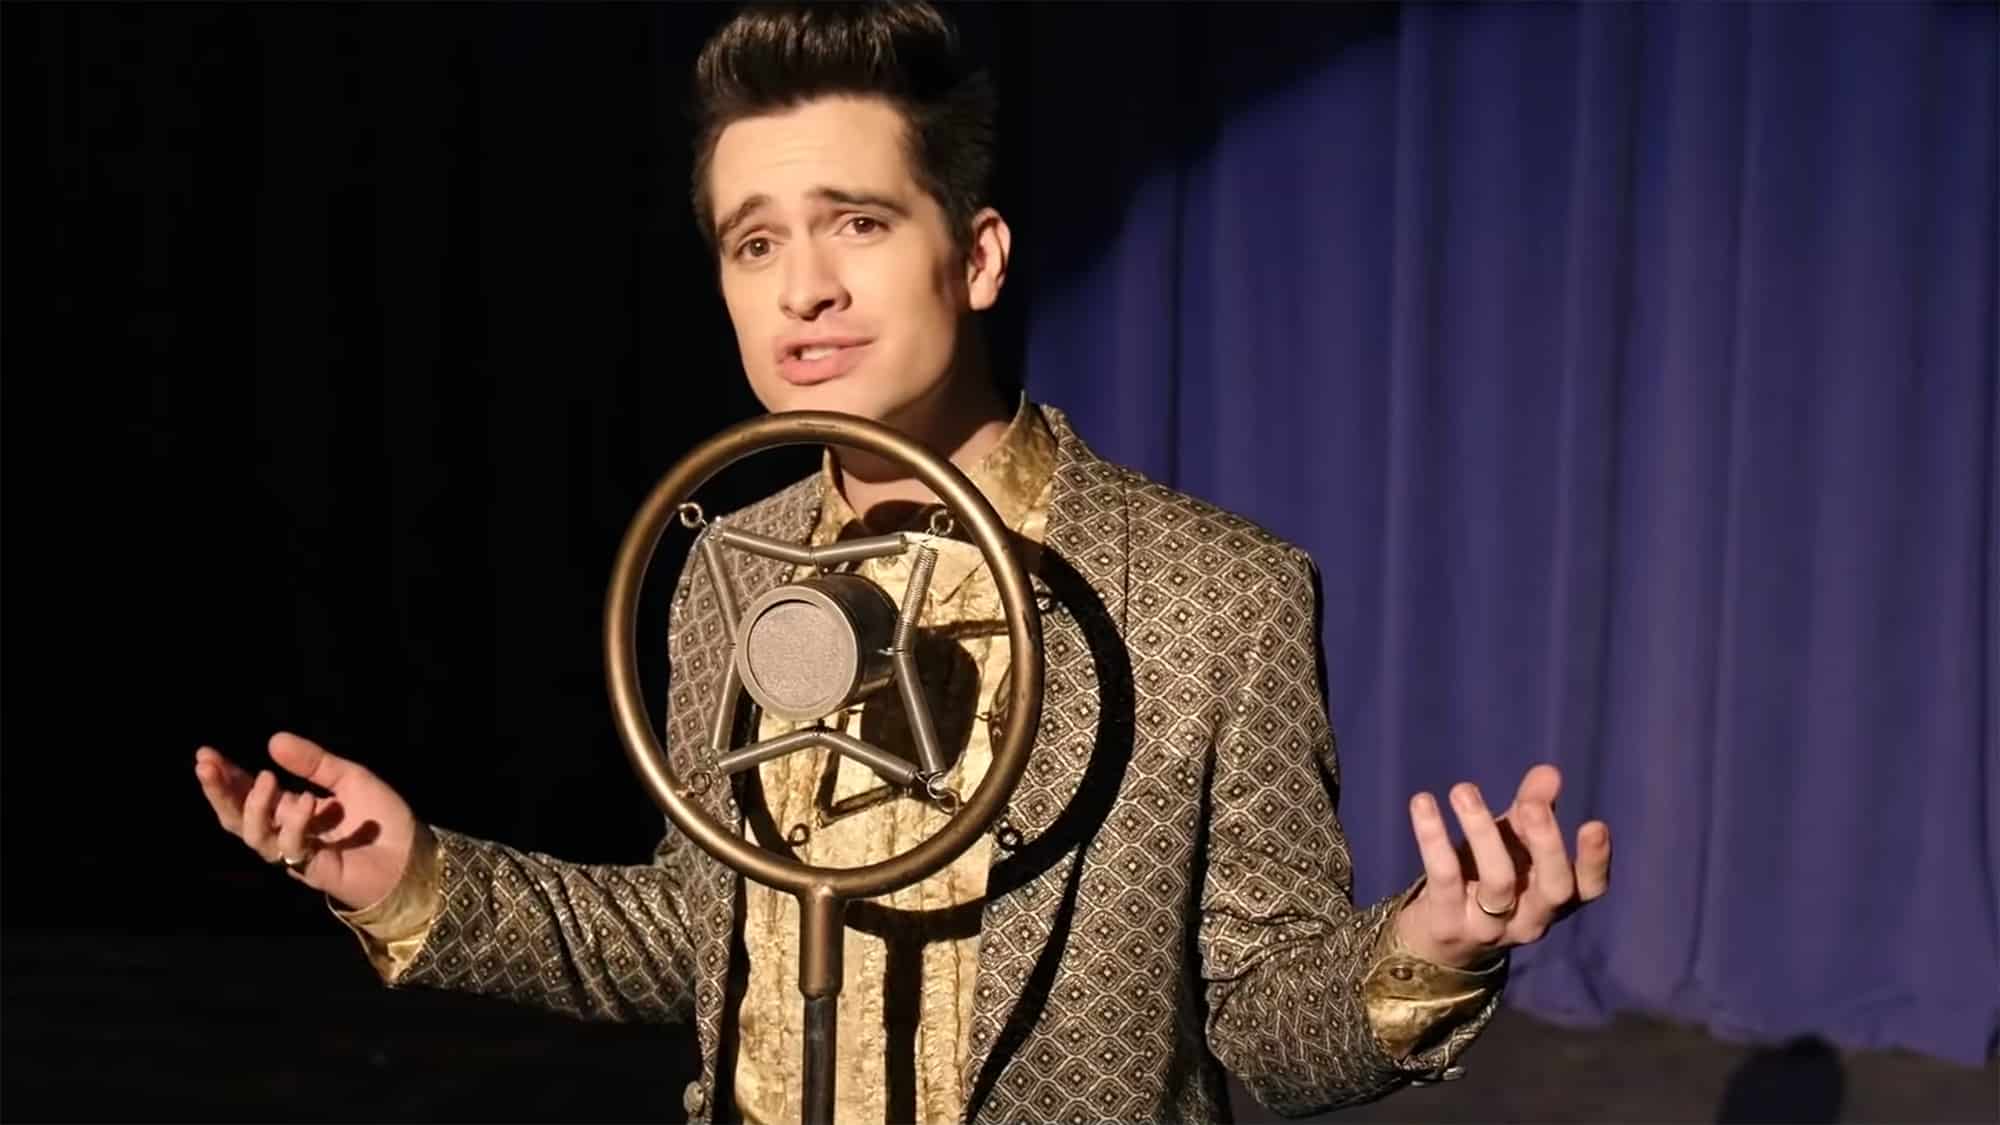 Behind The Song: Panic! At The Disco, “Into the Unknown”